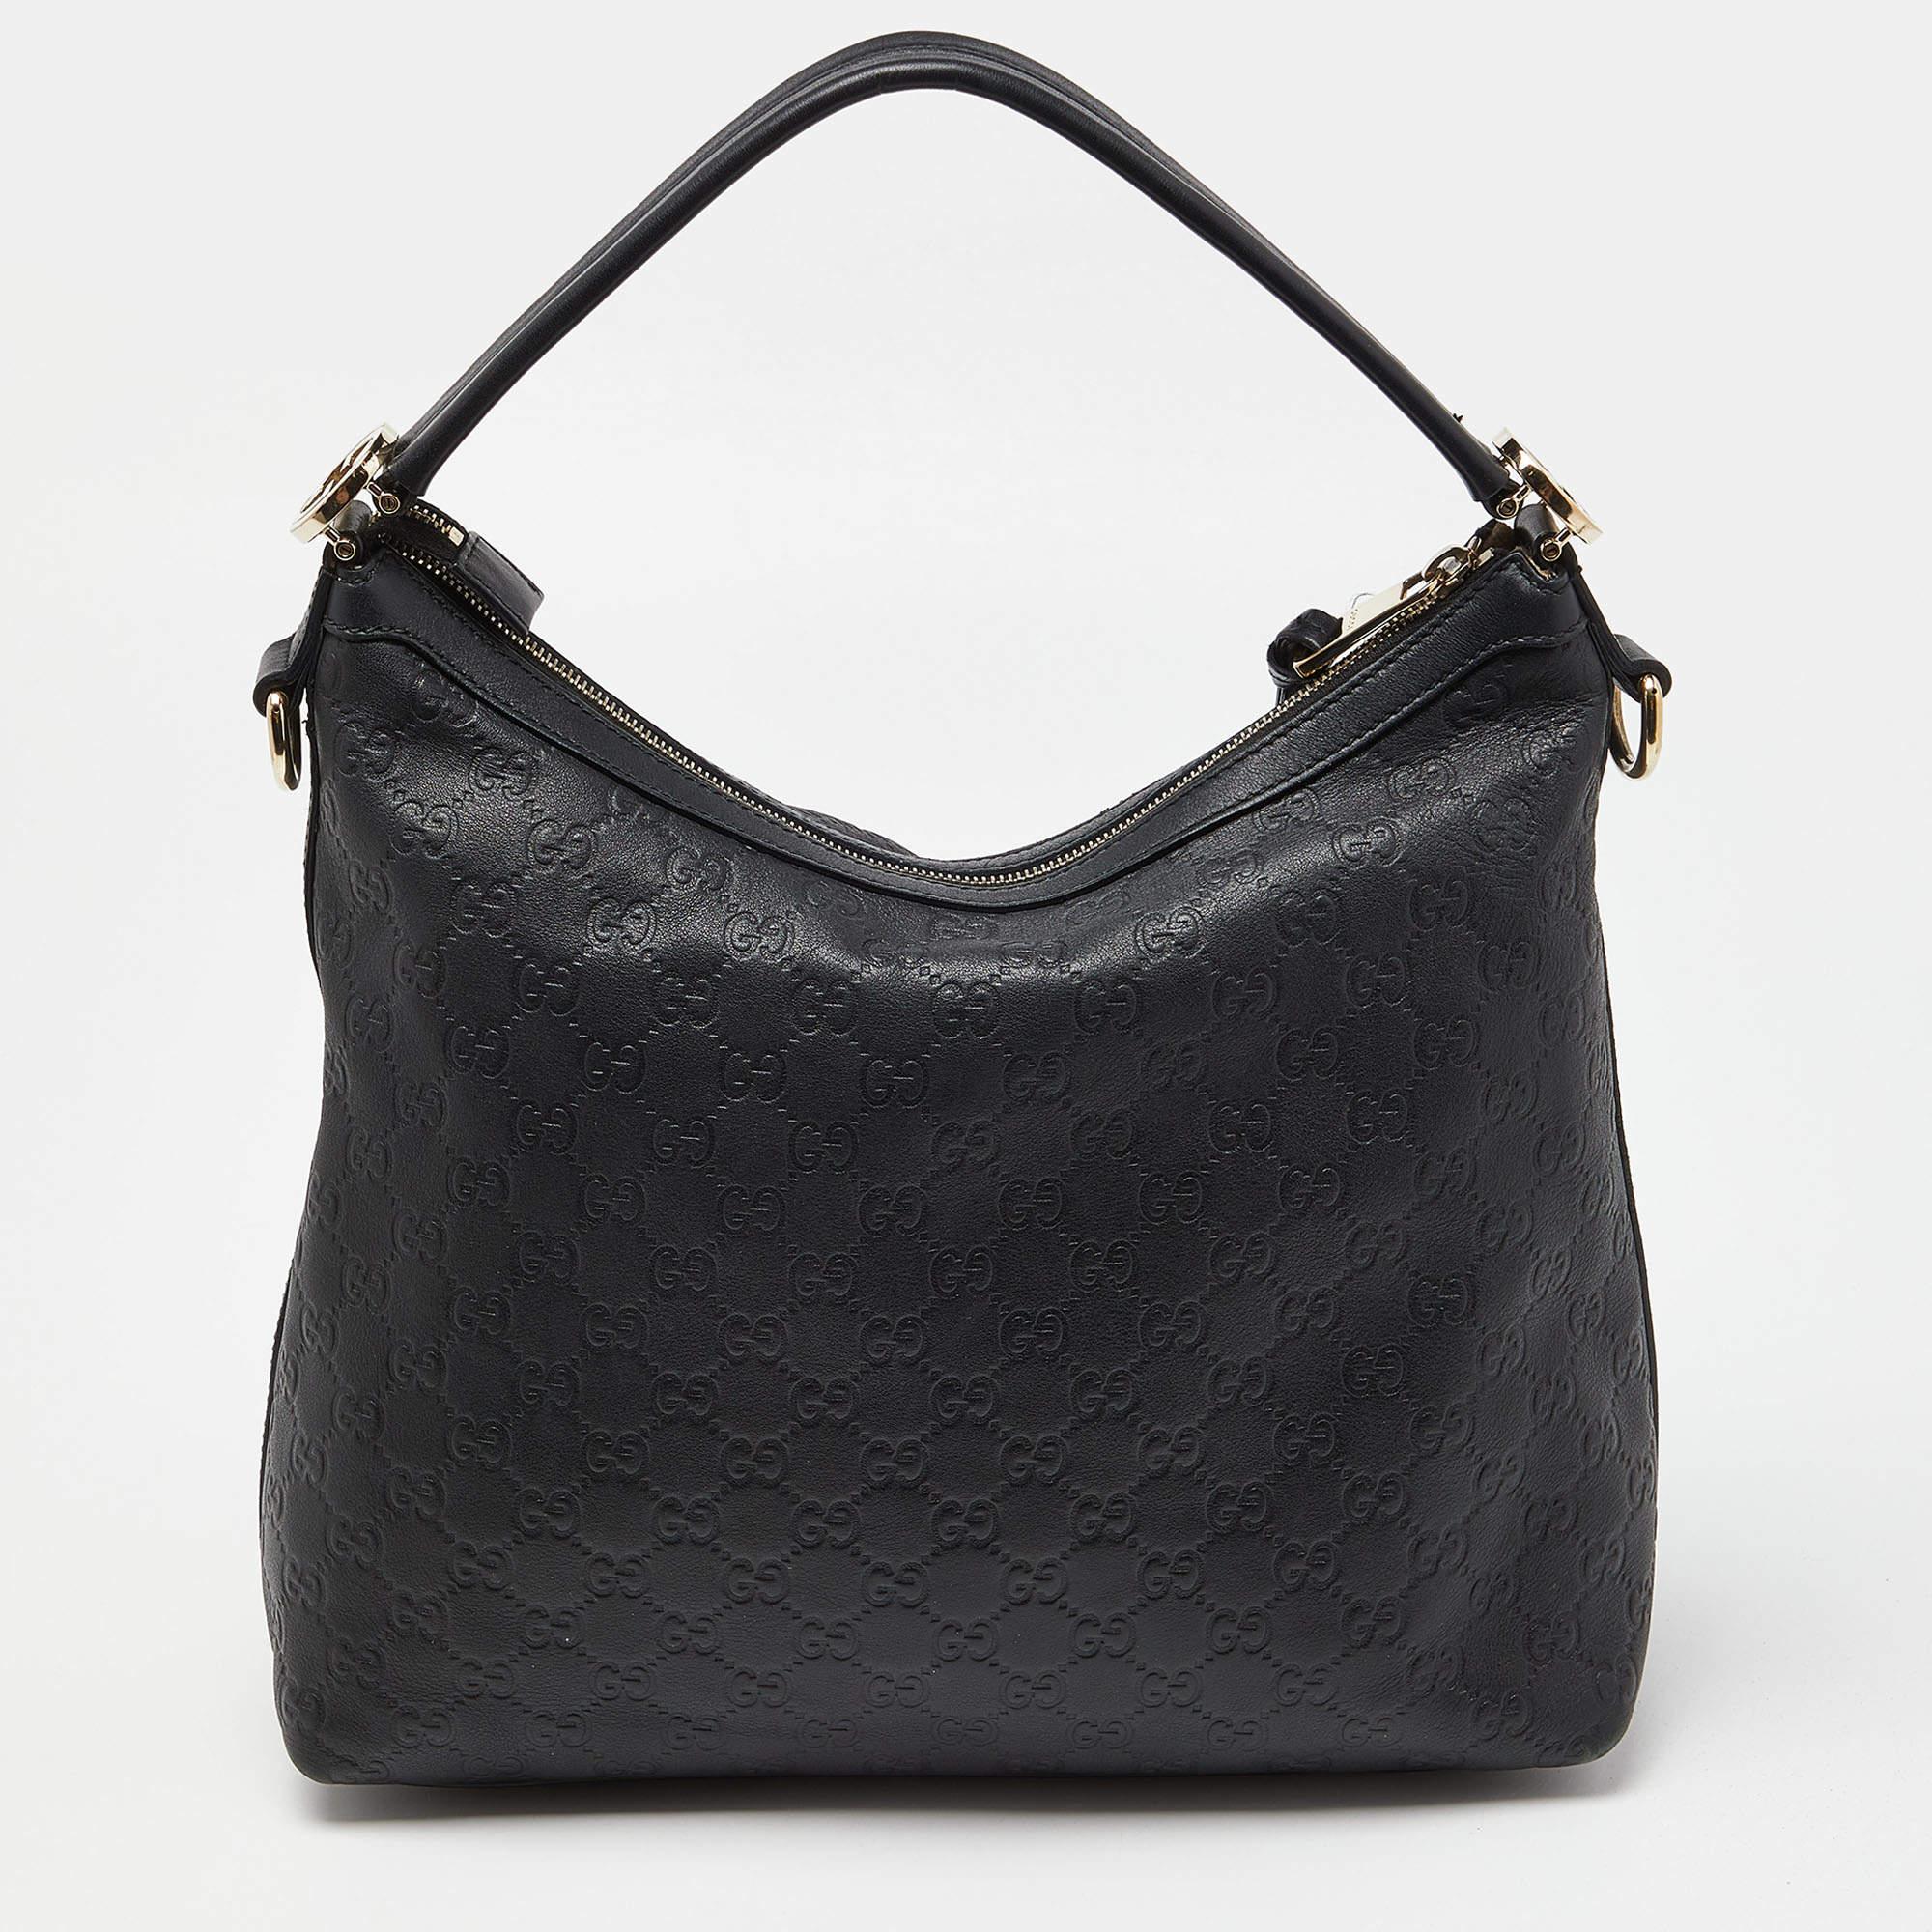 Stylish handbags never fail to make a fashionable impression. Make this designer hobo yours by pairing it with your sophisticated workwear as well as chic casual looks.

Includes: Original Dustbag

